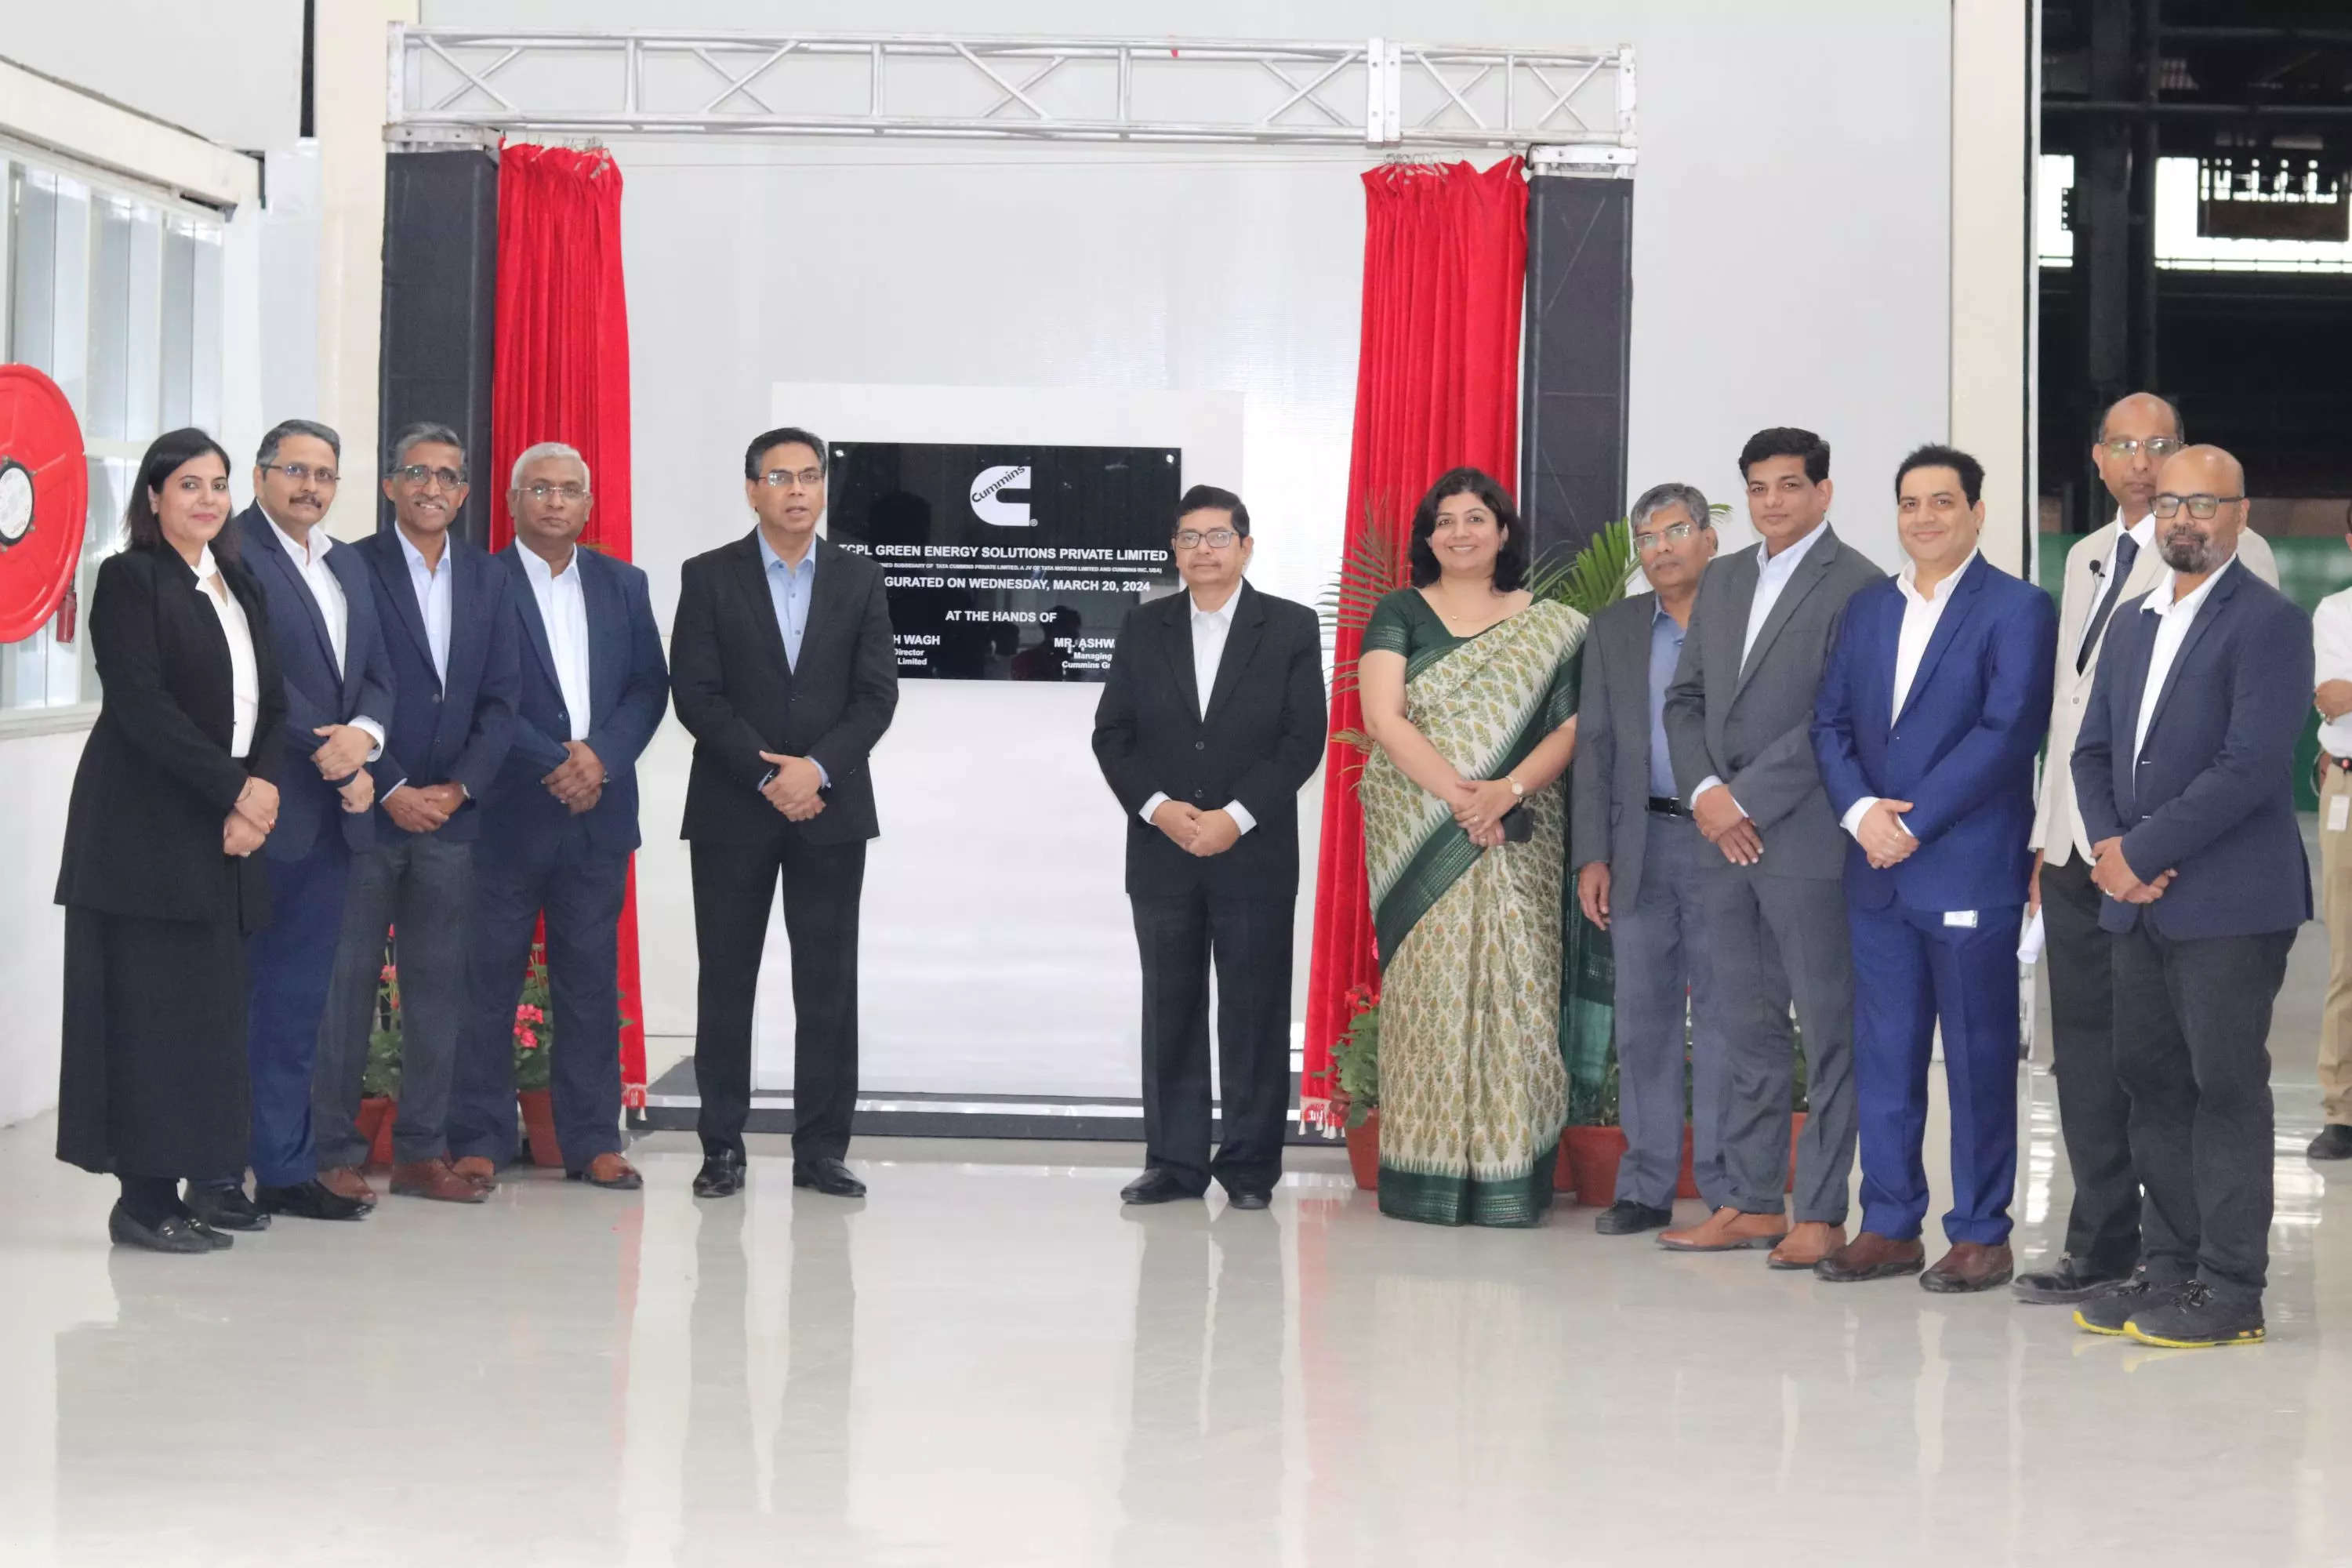 <p>Tata Motors and Cummins have a 30-year strong partnership in India through their joint venture Tata Cummins Private Limited (TCPL).</p>